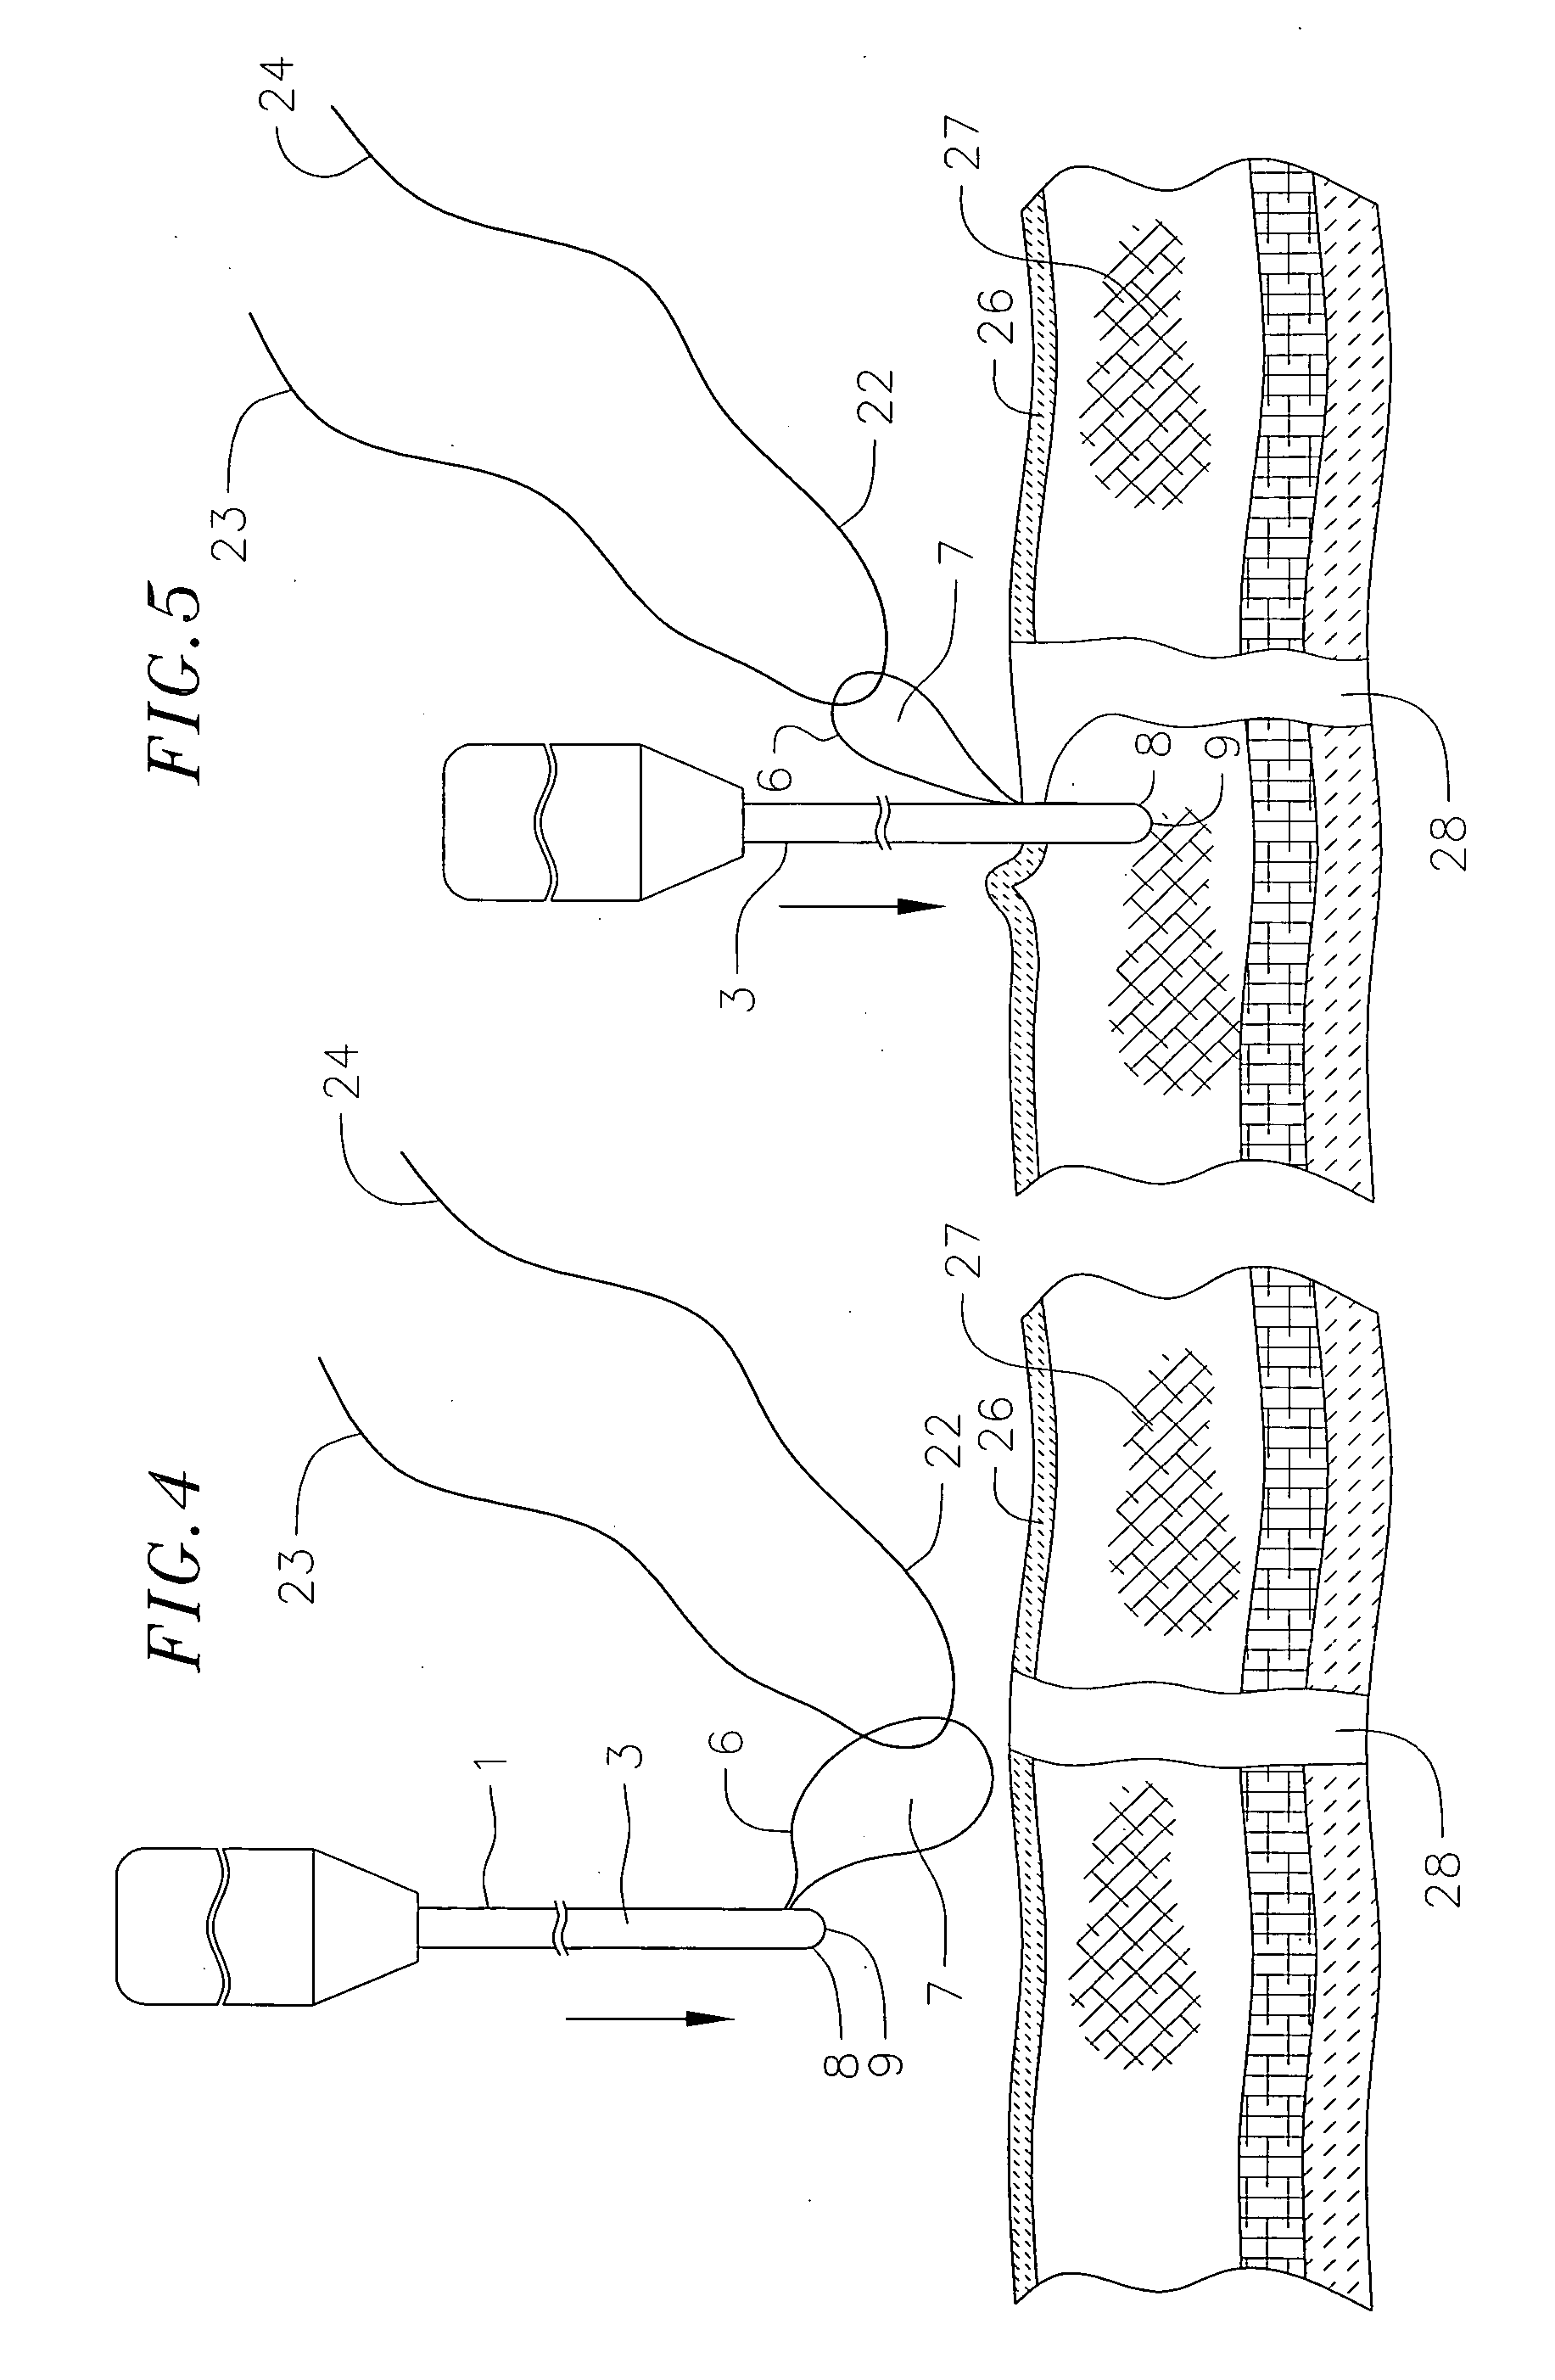 Suture passer device for abdominal or thoracoscopic surgery